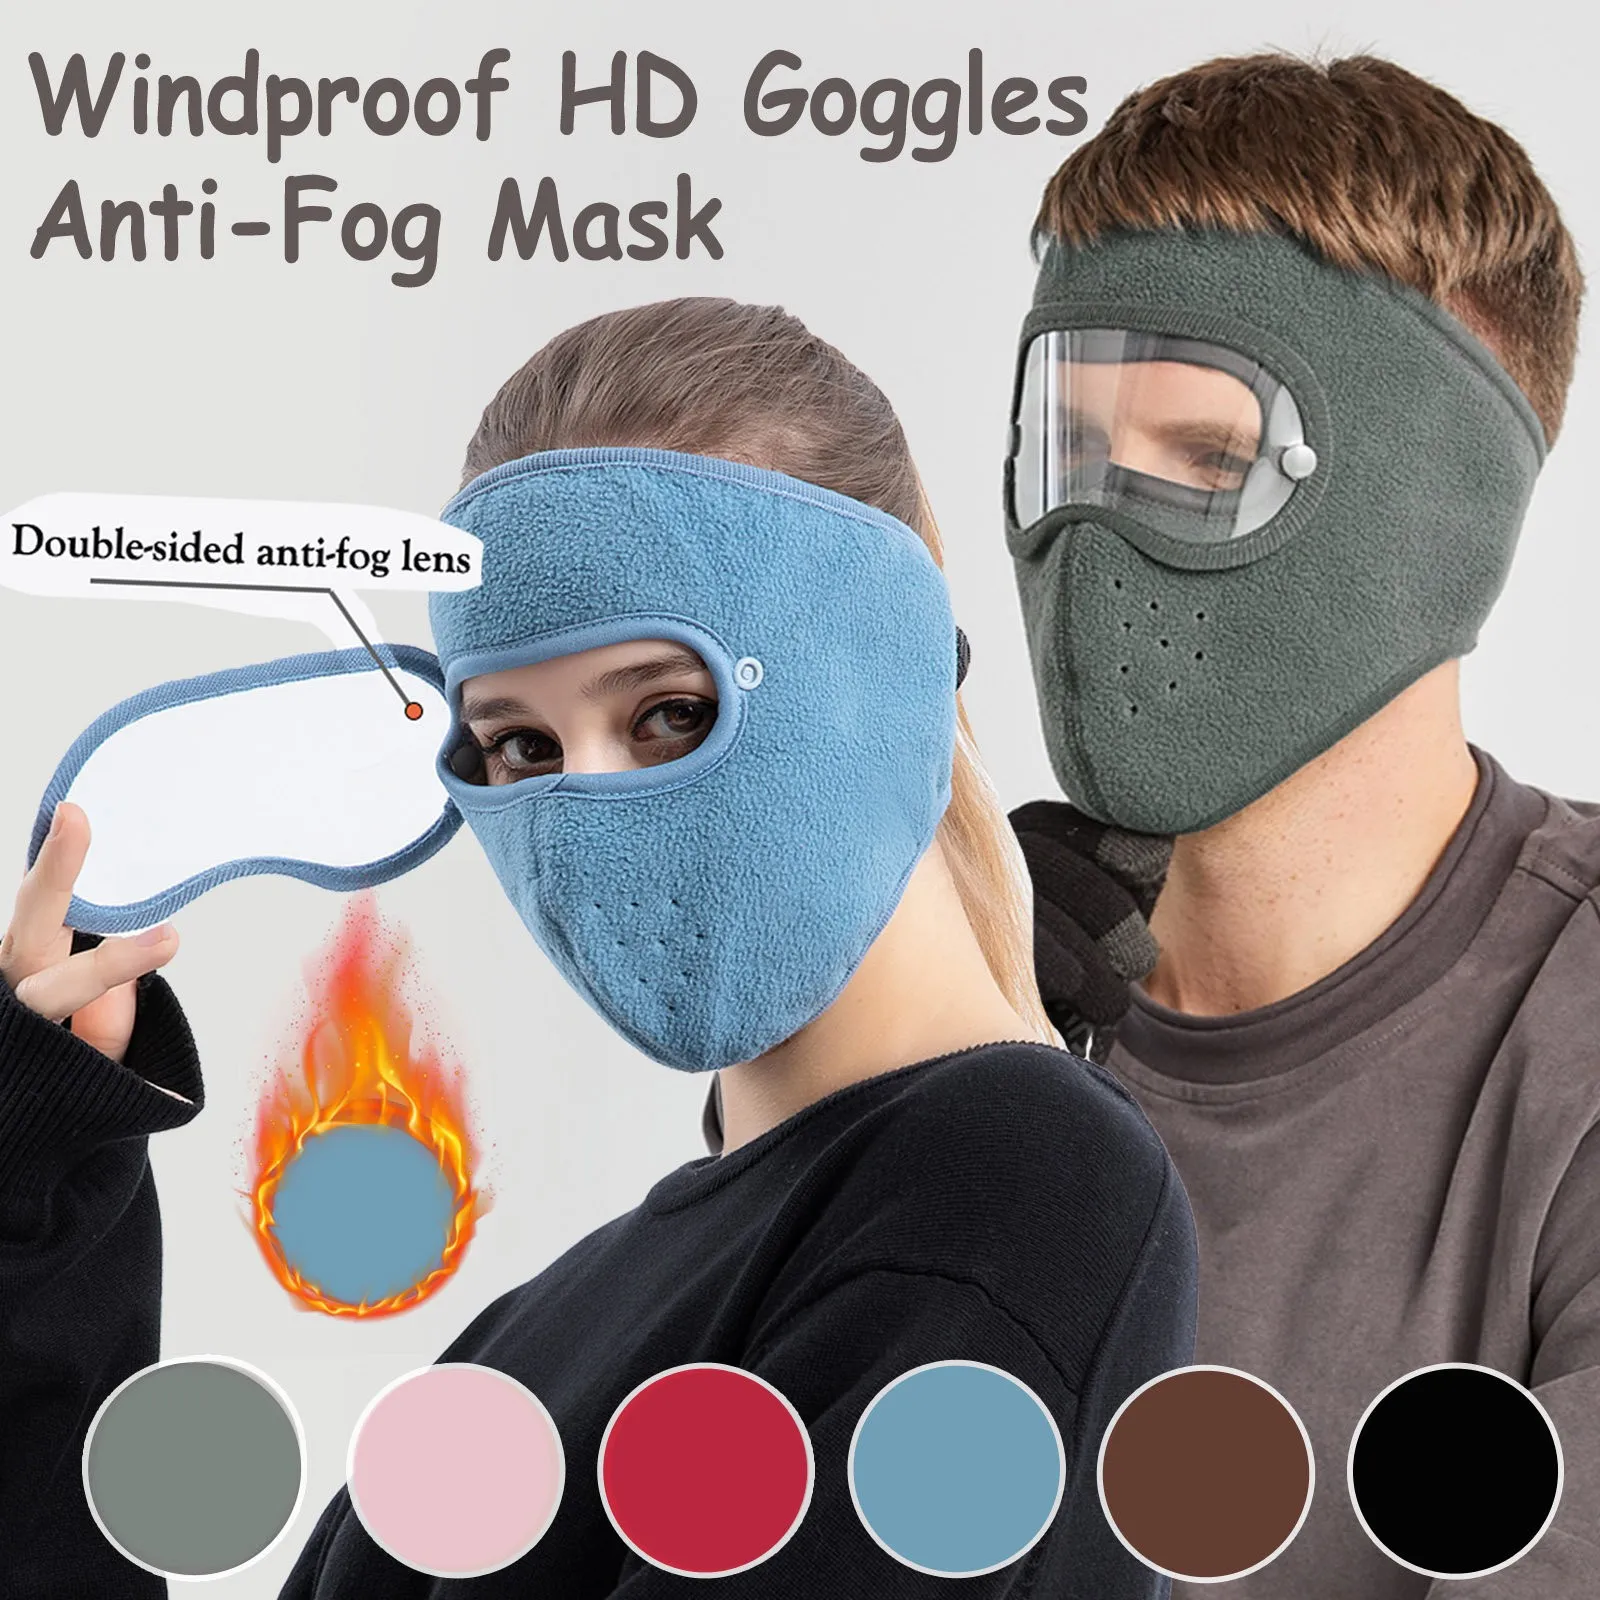 Winter Windproof Anti Dust Full Face Mask Cycling Ski Breathable Masks High Definition Anti Fog Goggles Hood Cover